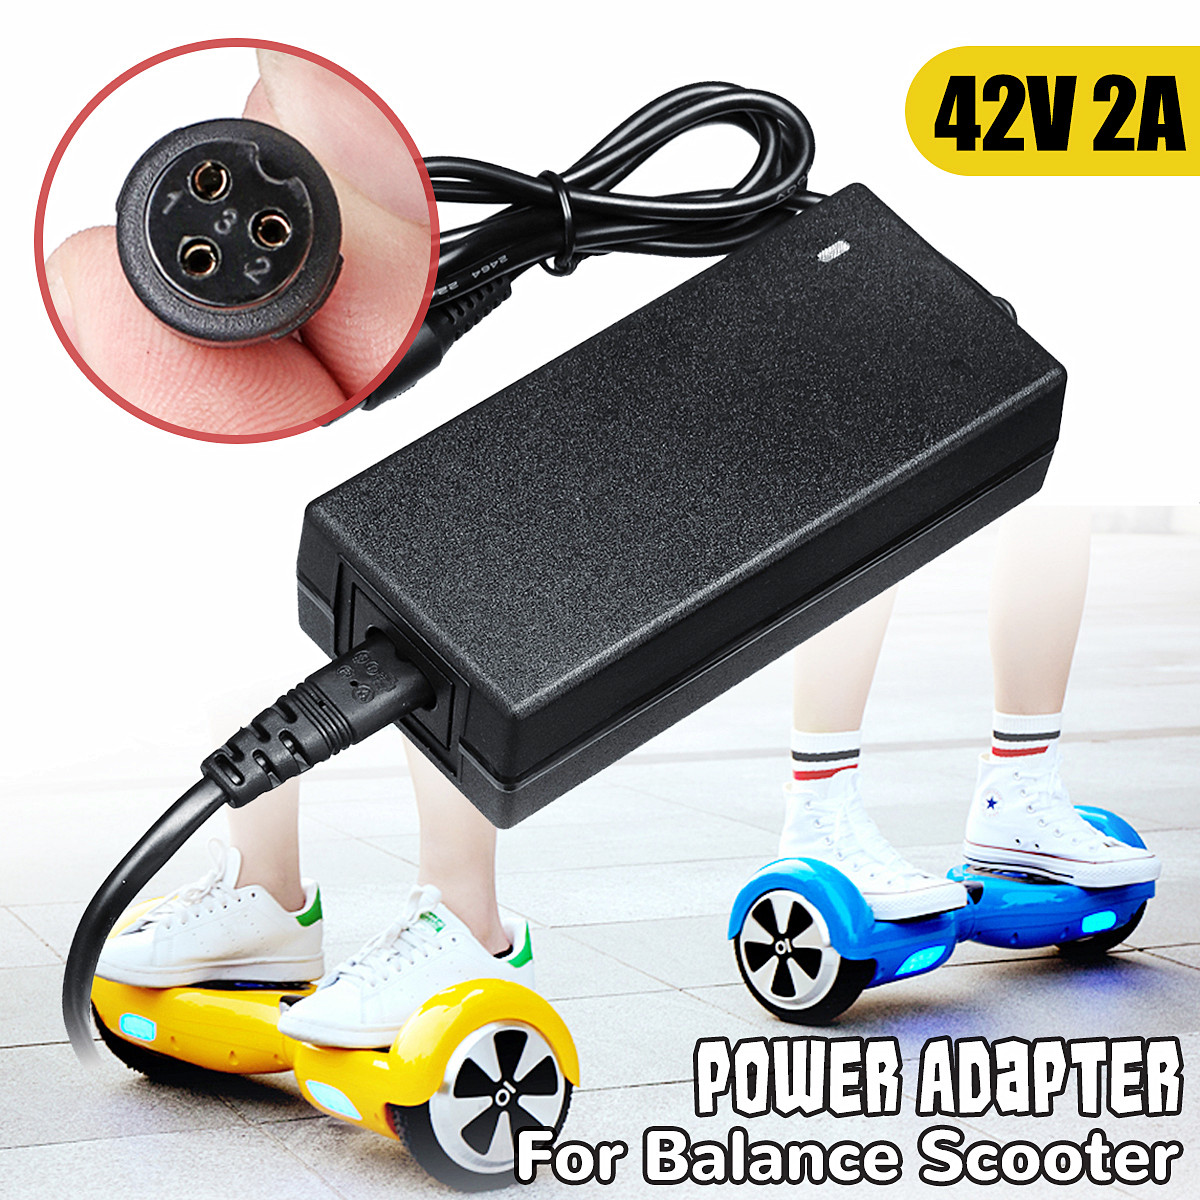 42V-2A-Power-Adapter-Battery-Charger-For-2-Wheel-Electric-Balance-Scooter-UK-Plug-1368826-1